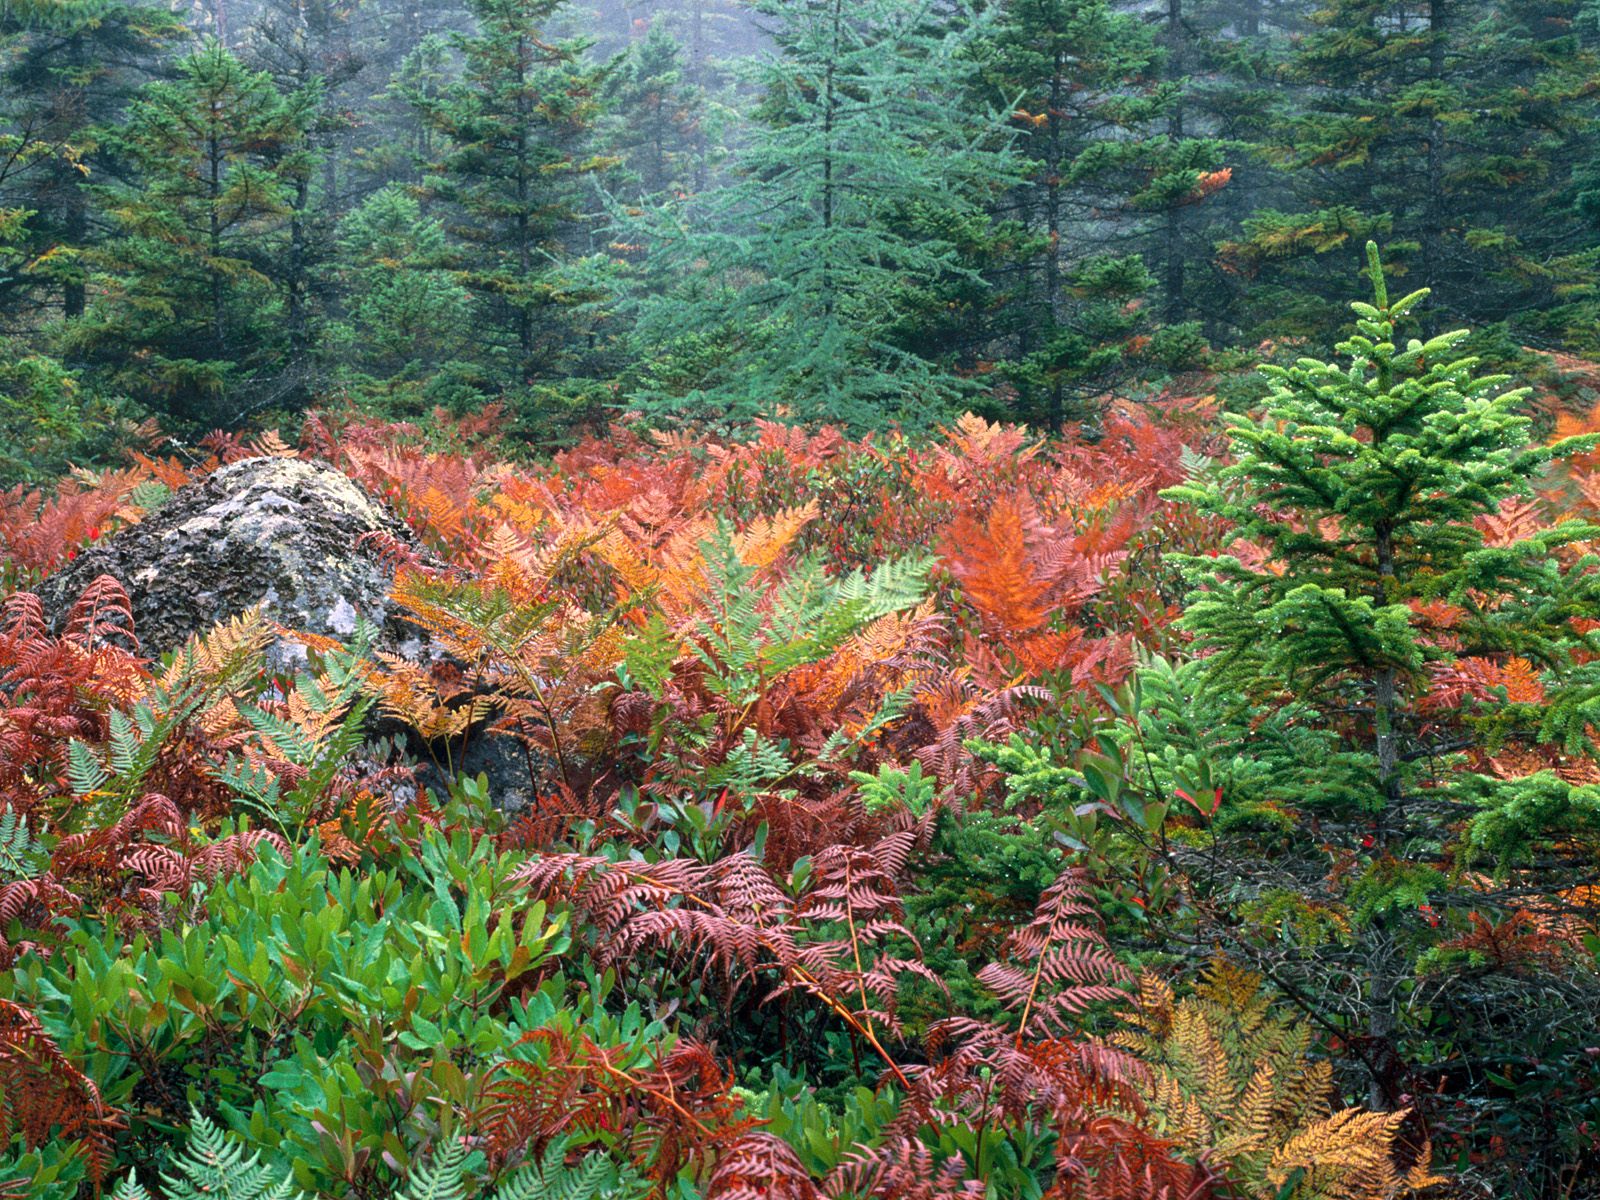 Colorful Ferns in Autumn, Acadia National Park,